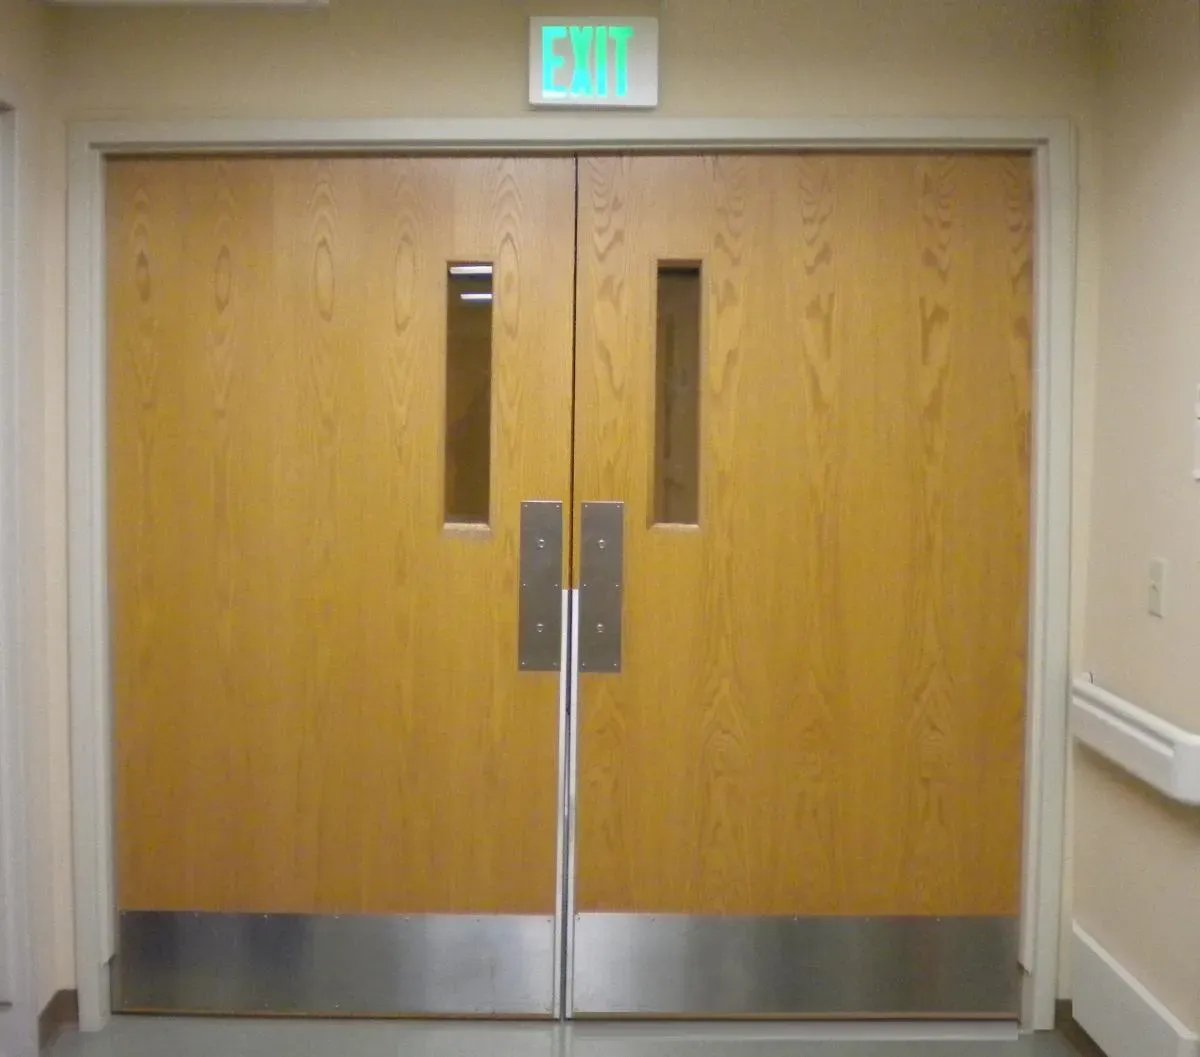 Door without handles, obviously for pushing only